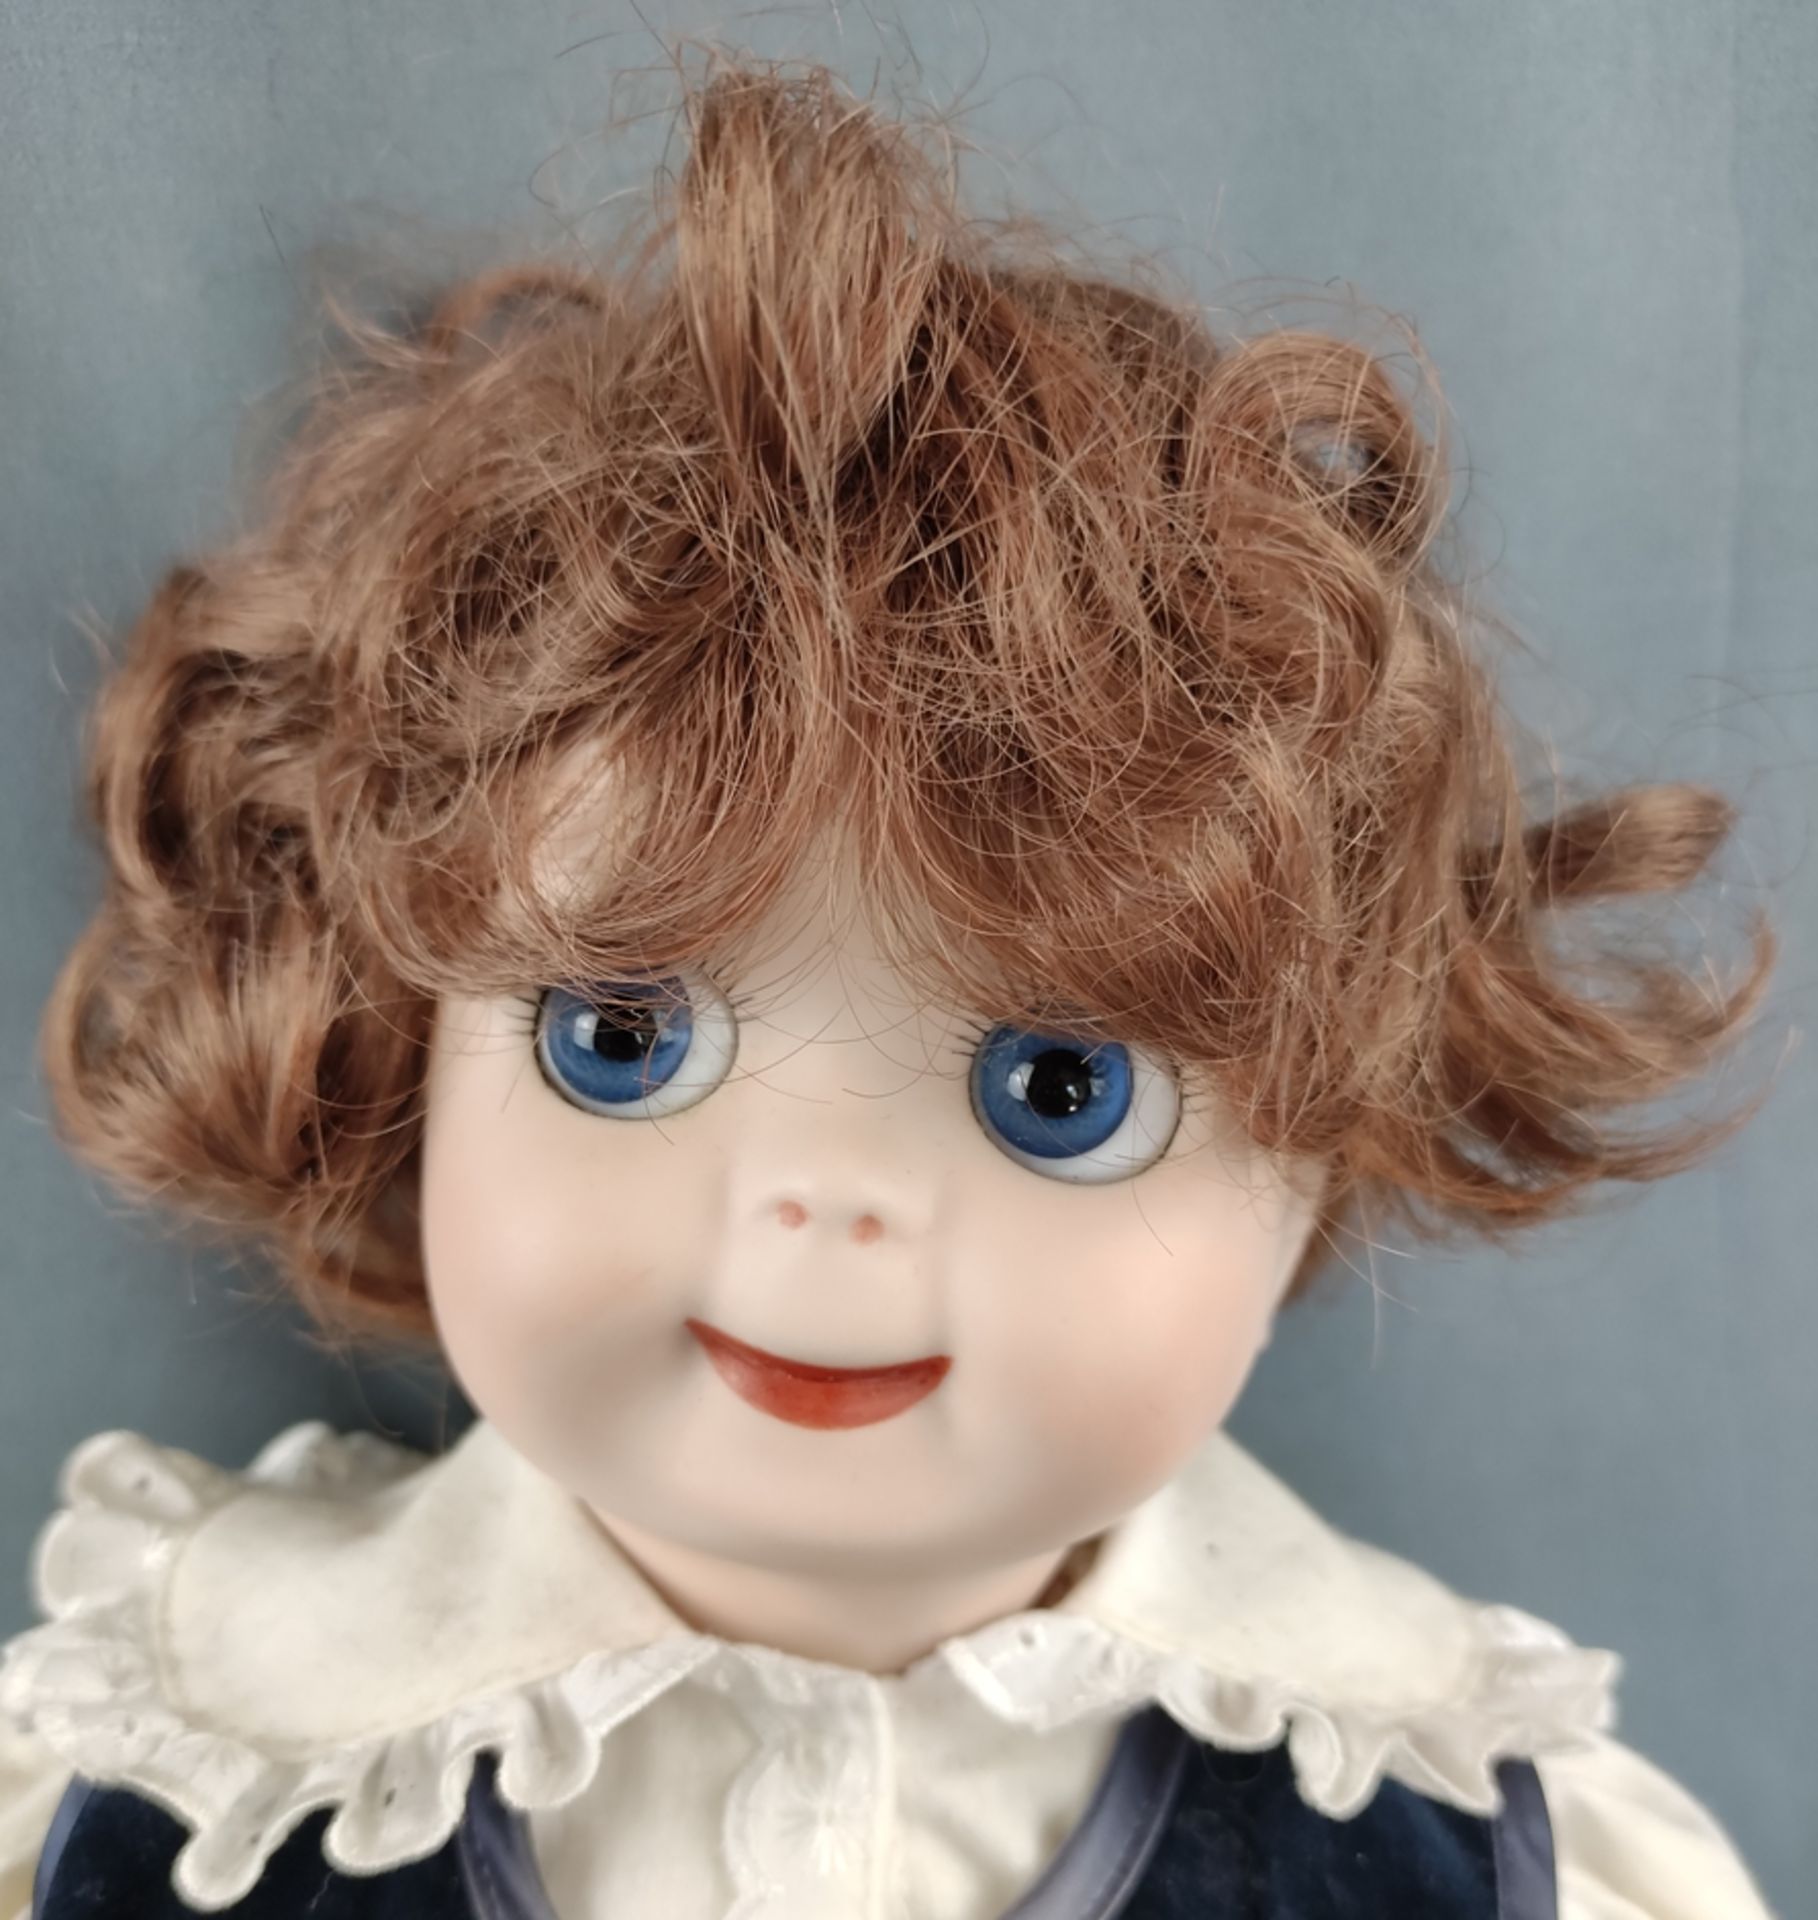 Doll "Googlie" by J.D. Kestner, with big blue eyes and closed melon mouth, brown curly wig and stra - Image 2 of 5